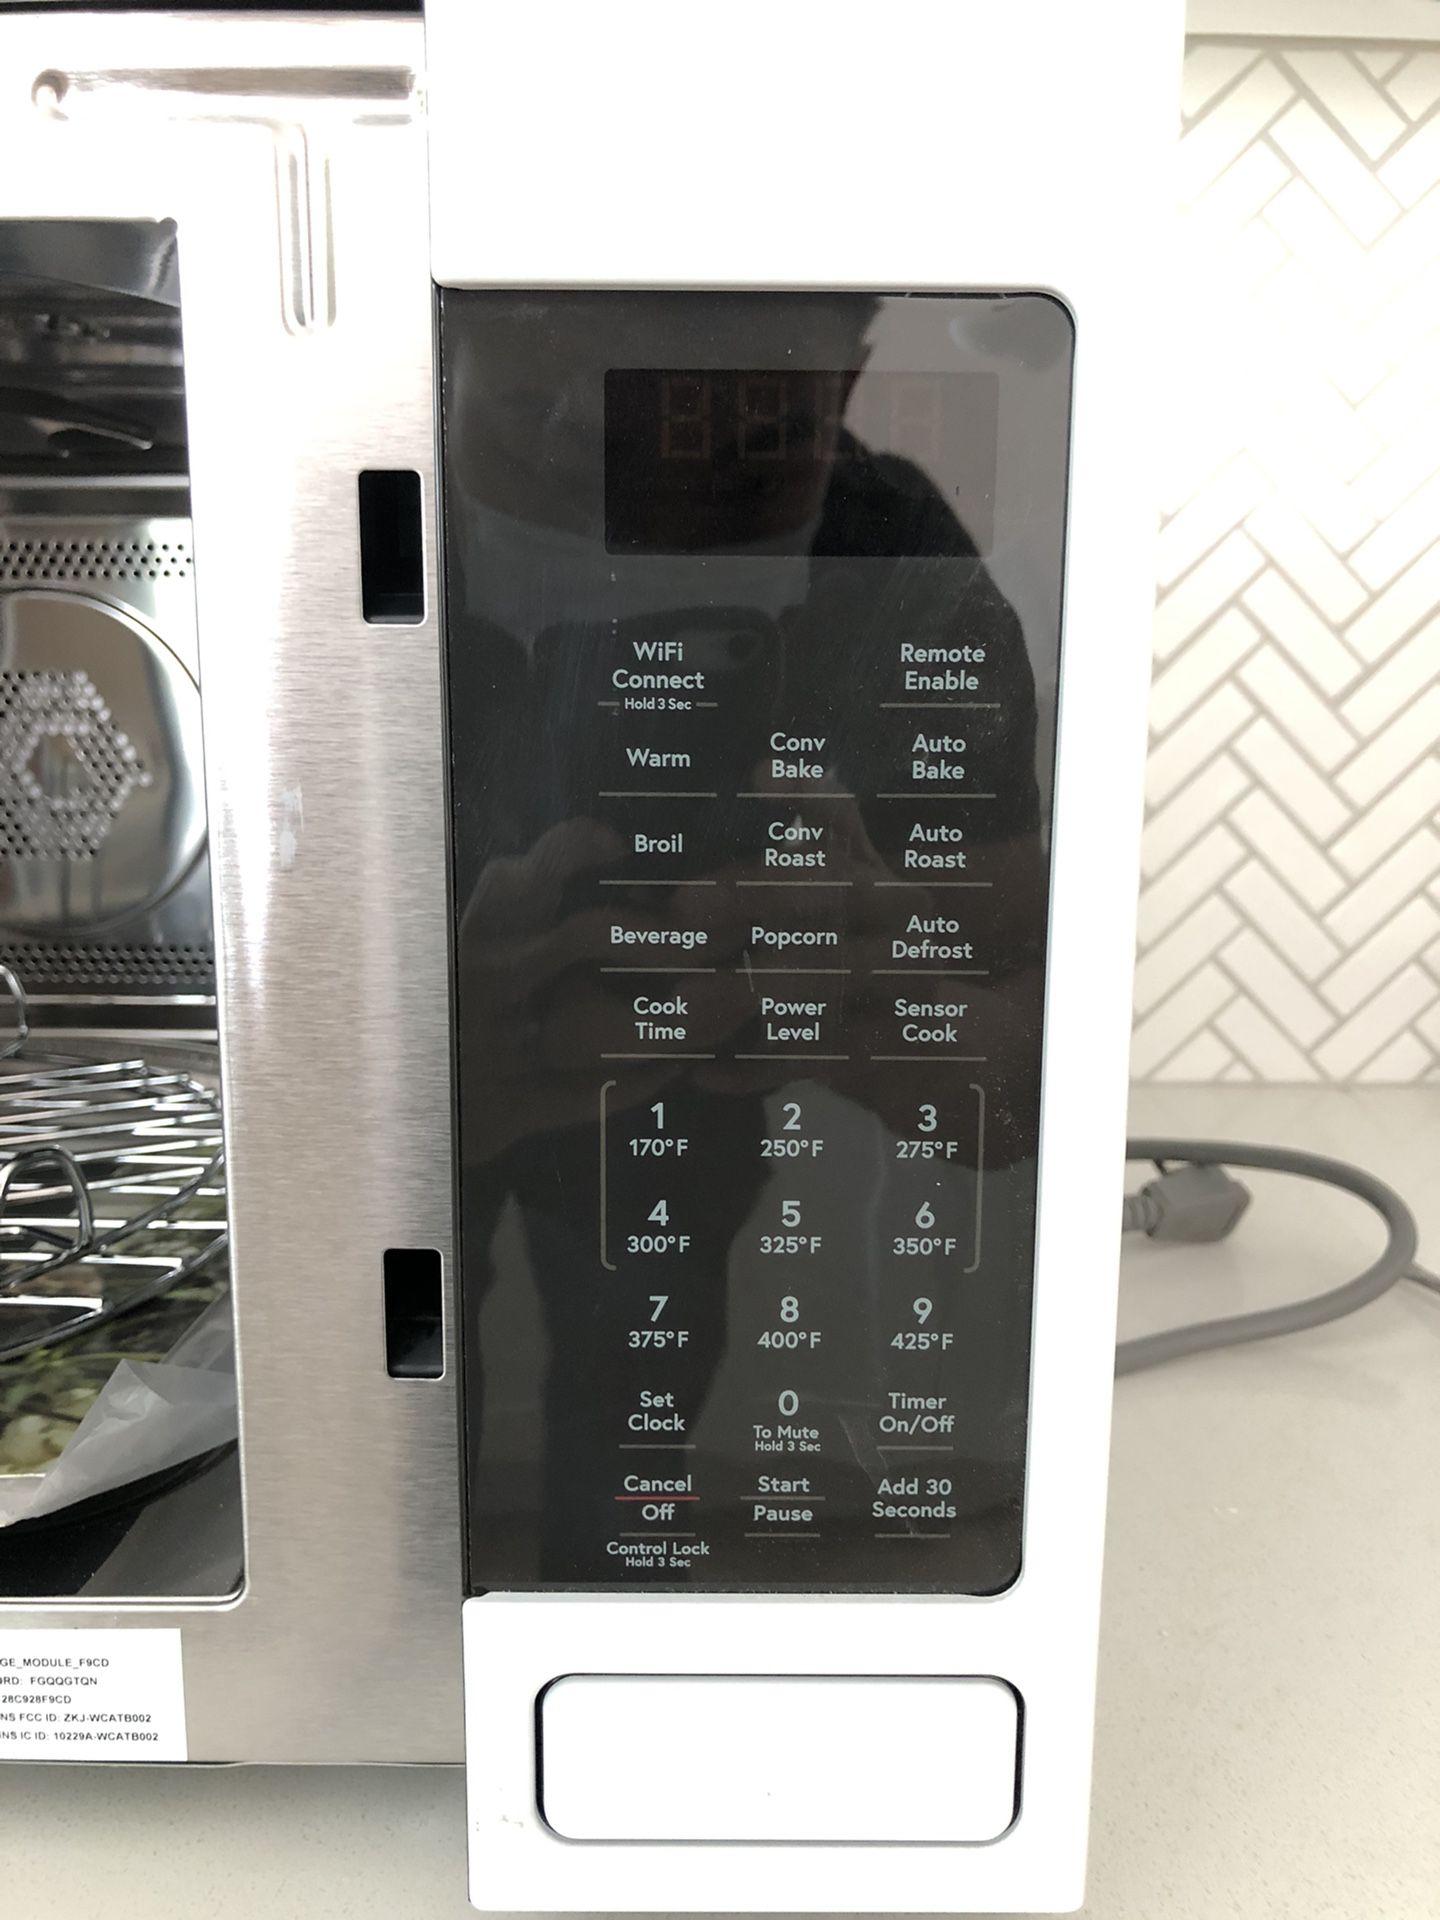 Cuisinart AMW-60 3-in-1 Microwave Airfryer Oven - Brand New, Never Used!  for Sale in Syosset, NY - OfferUp